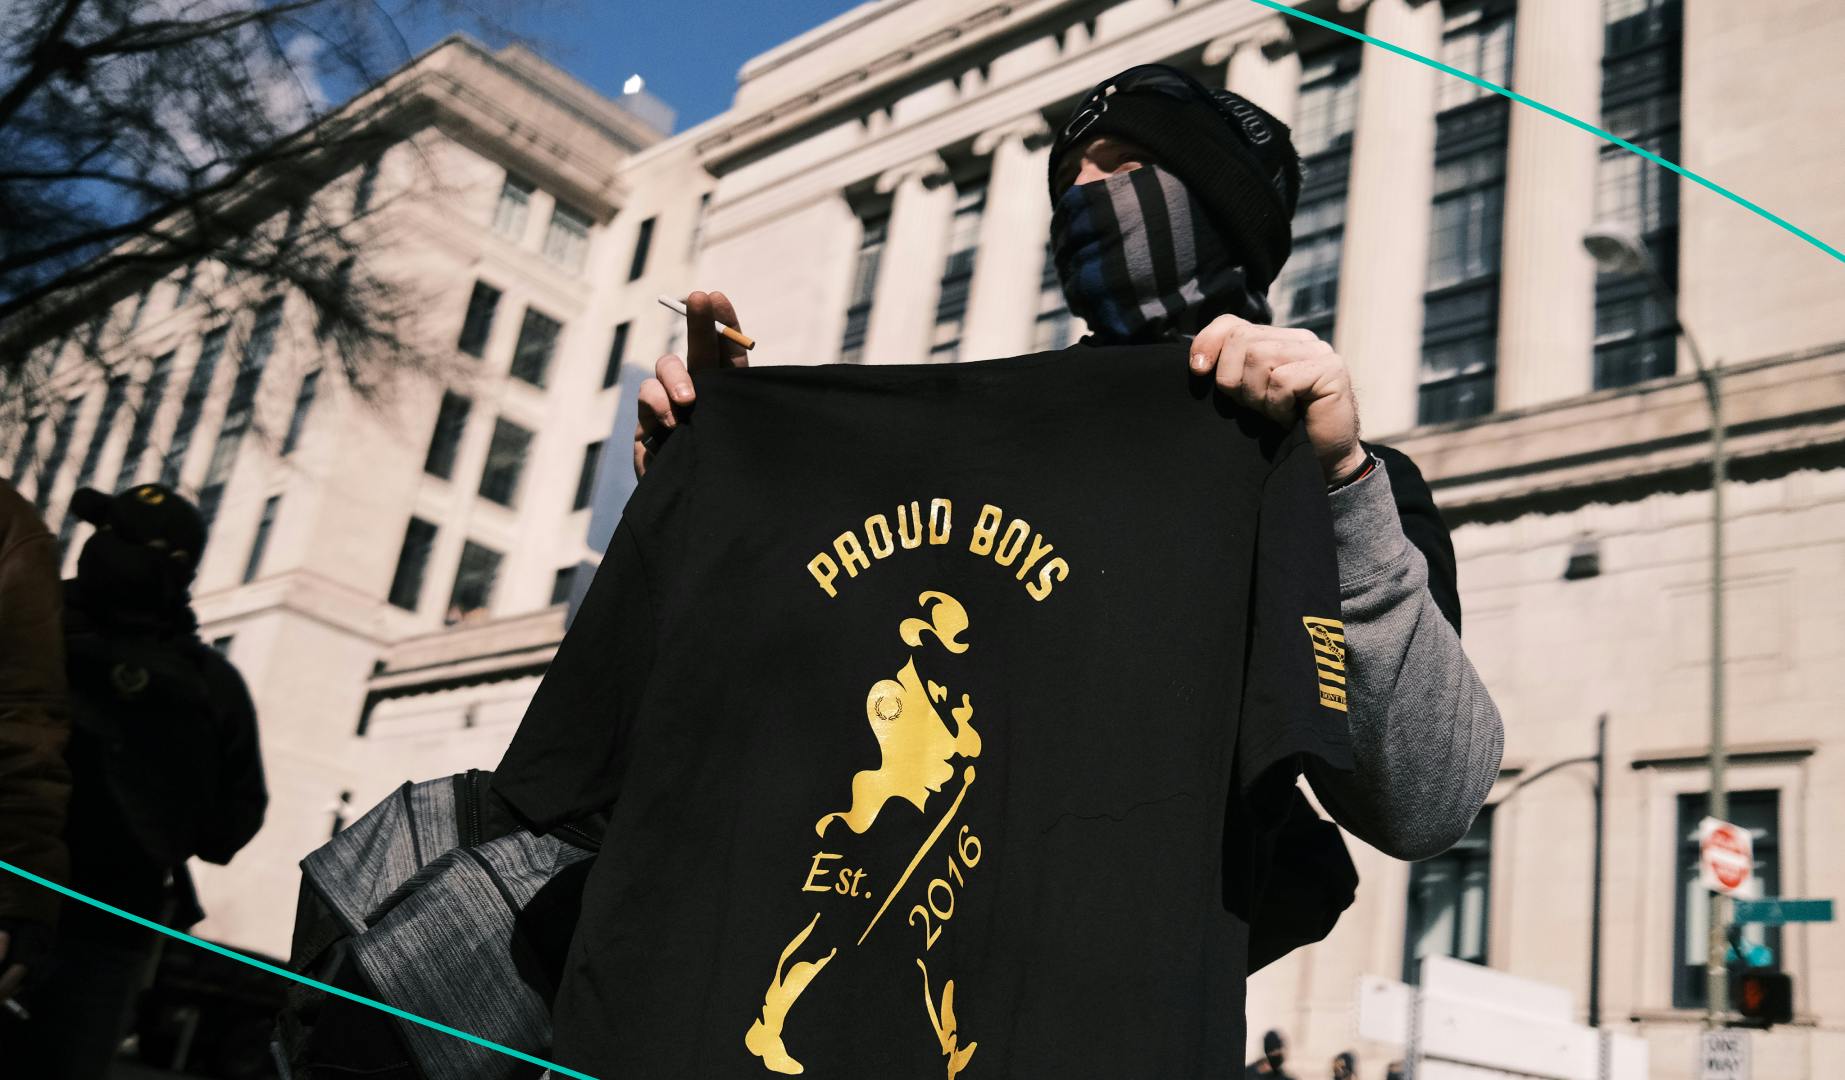 A member of the Proud Boys holds up a t-shirt 